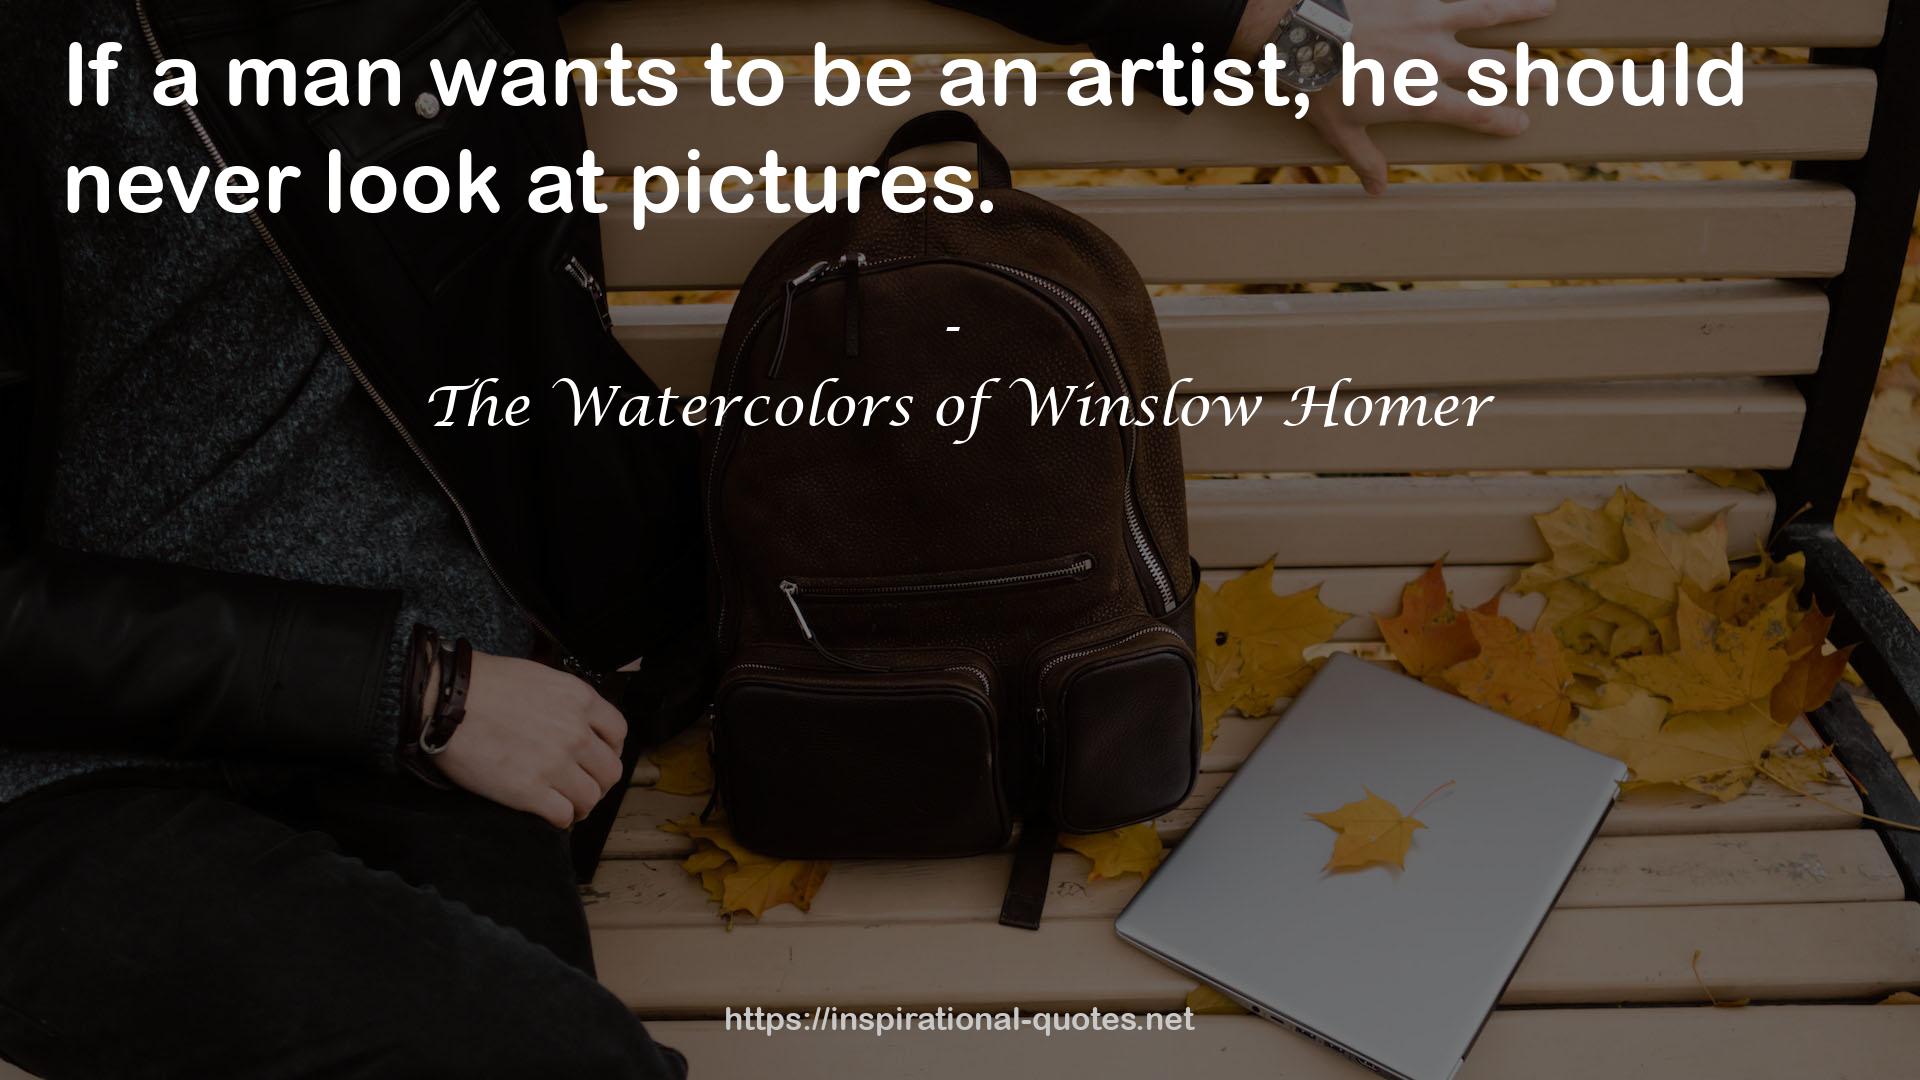 The Watercolors of Winslow Homer QUOTES